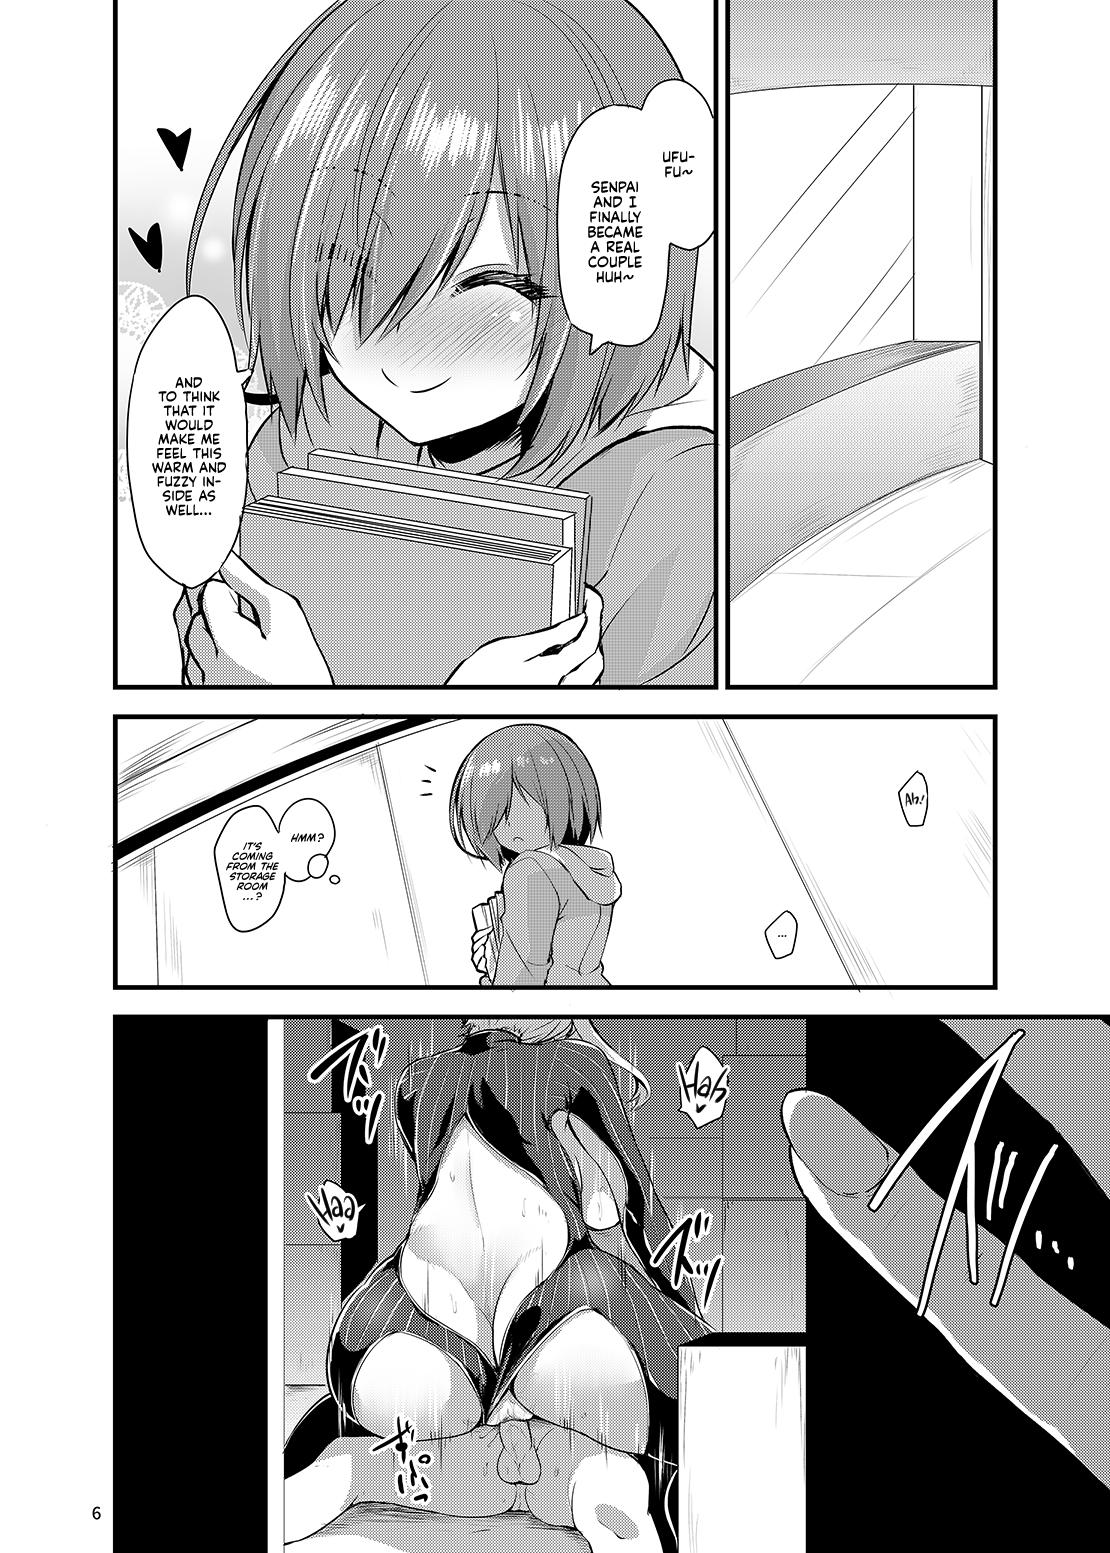 Reversecowgirl A Book About a Corrupted Mash Recklessly Making Love to Her NTR'd Master - Fate grand order Affair - Page 5